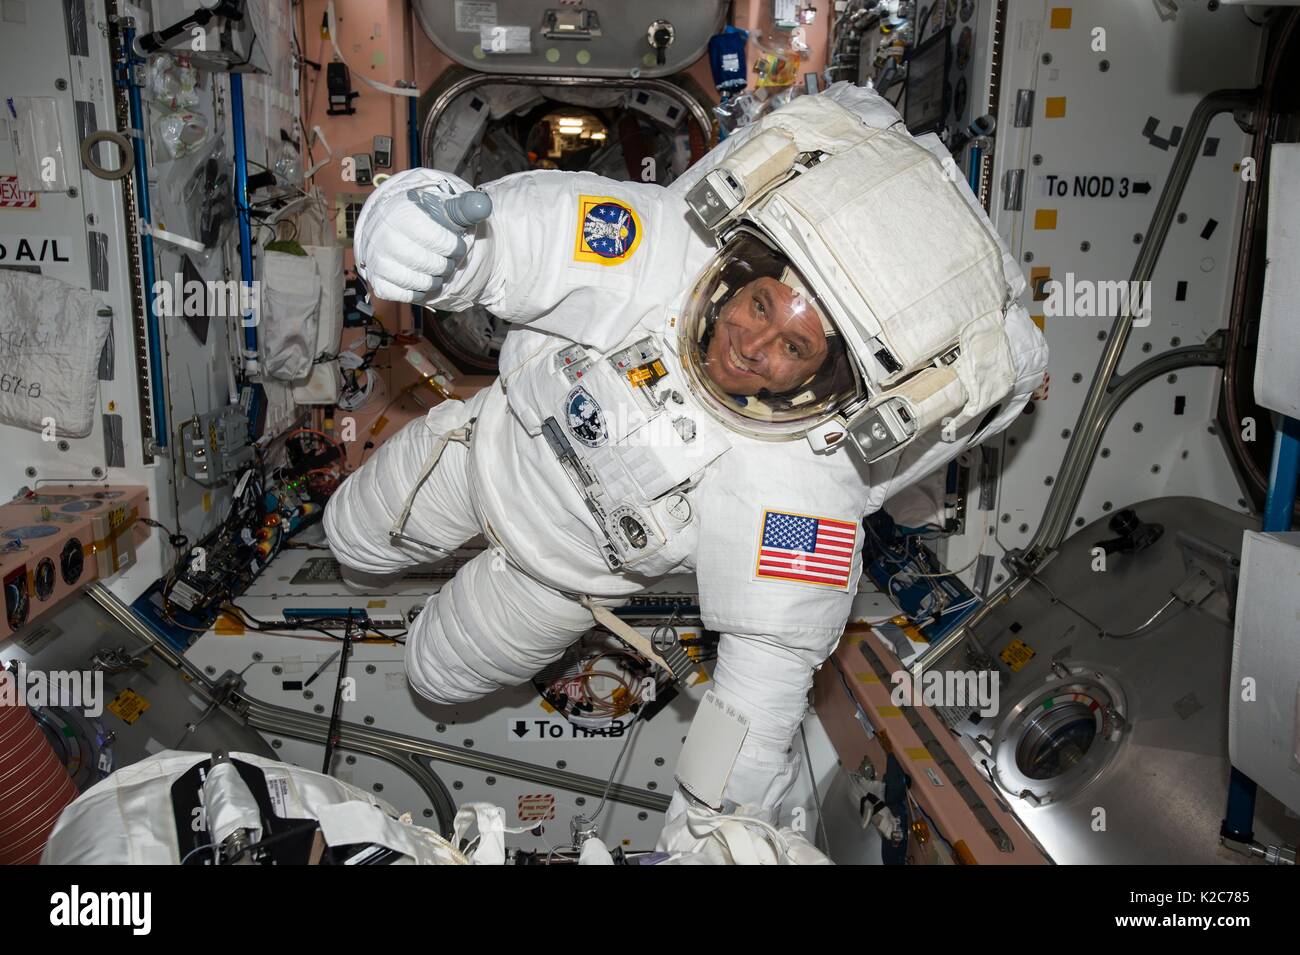 NASA International Space Station Expedition 51 prime crew member American astronaut Jack Fischer wears a spacesuit during a fit check in preparation for his first EVA spacewalk May 9, 2017 in Earth orbit. Stock Photo